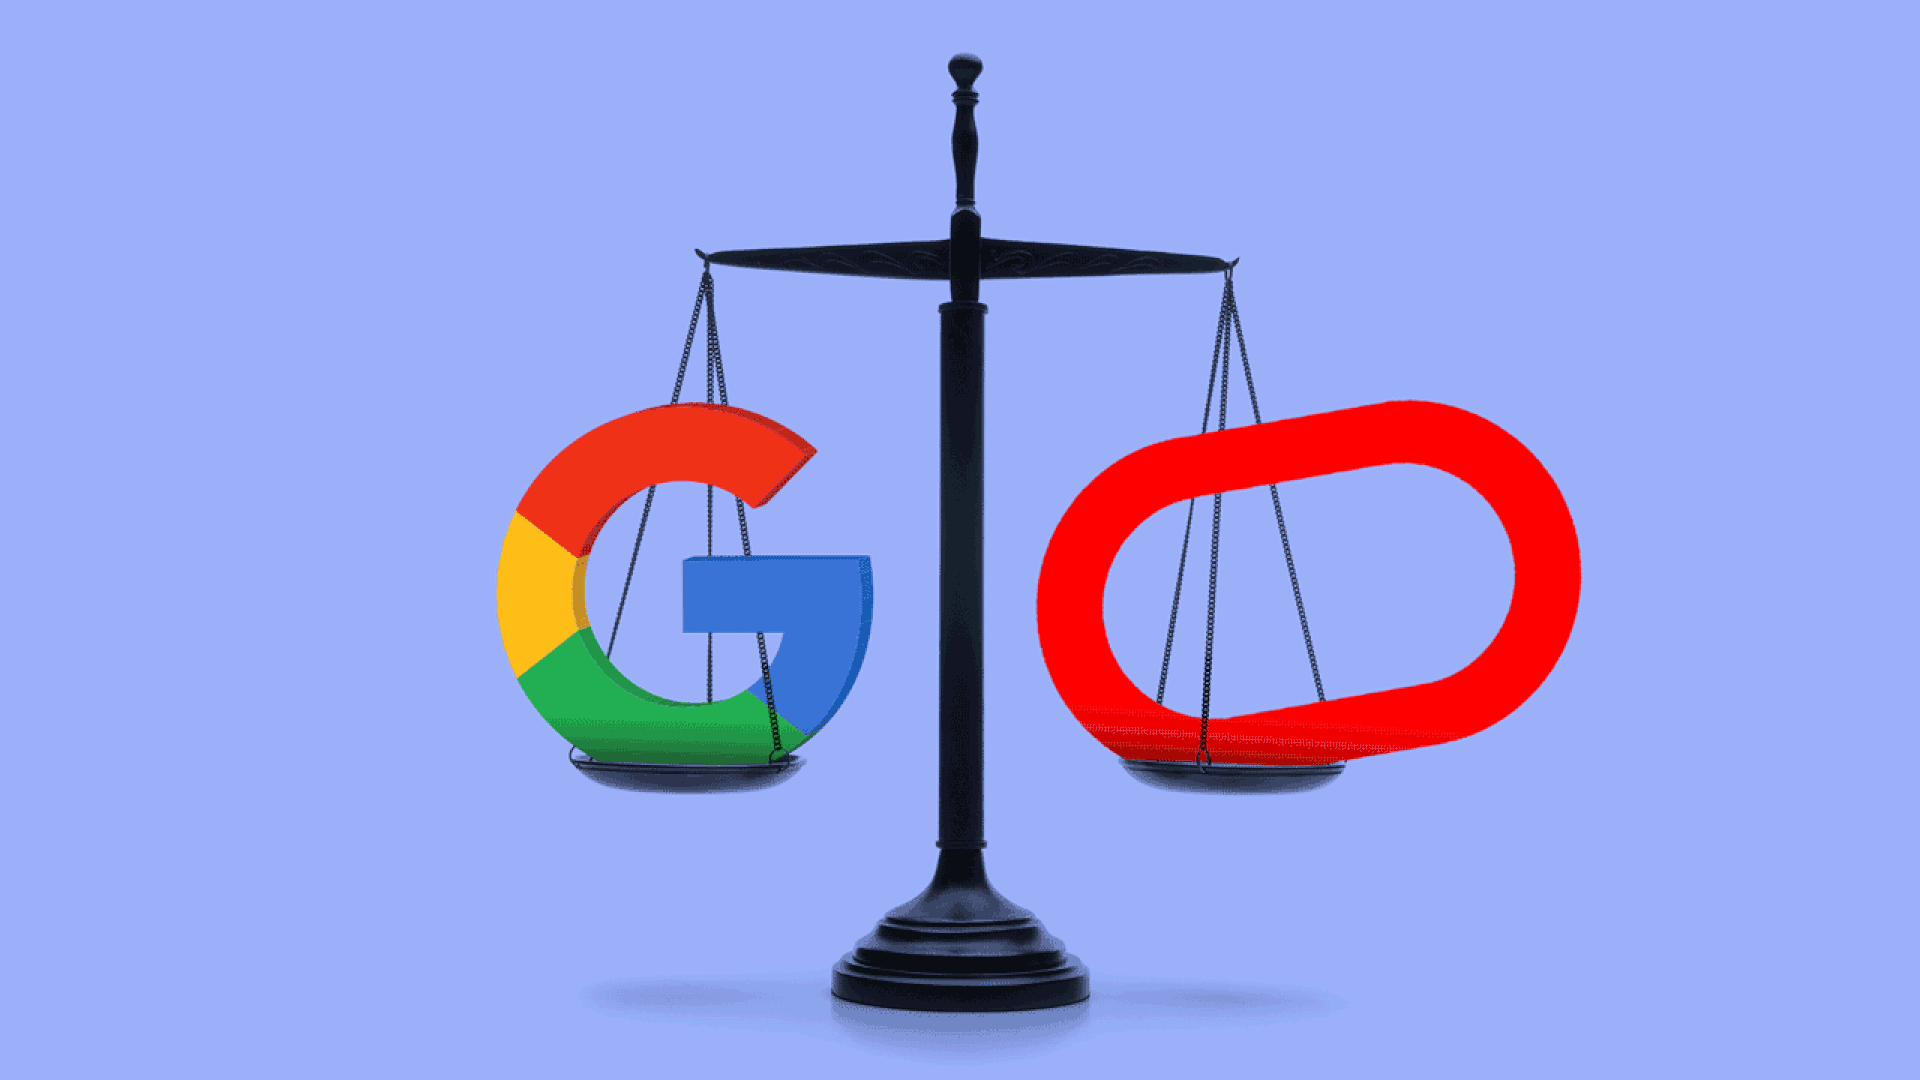 Oracle vs. Google was a software fight for the ages